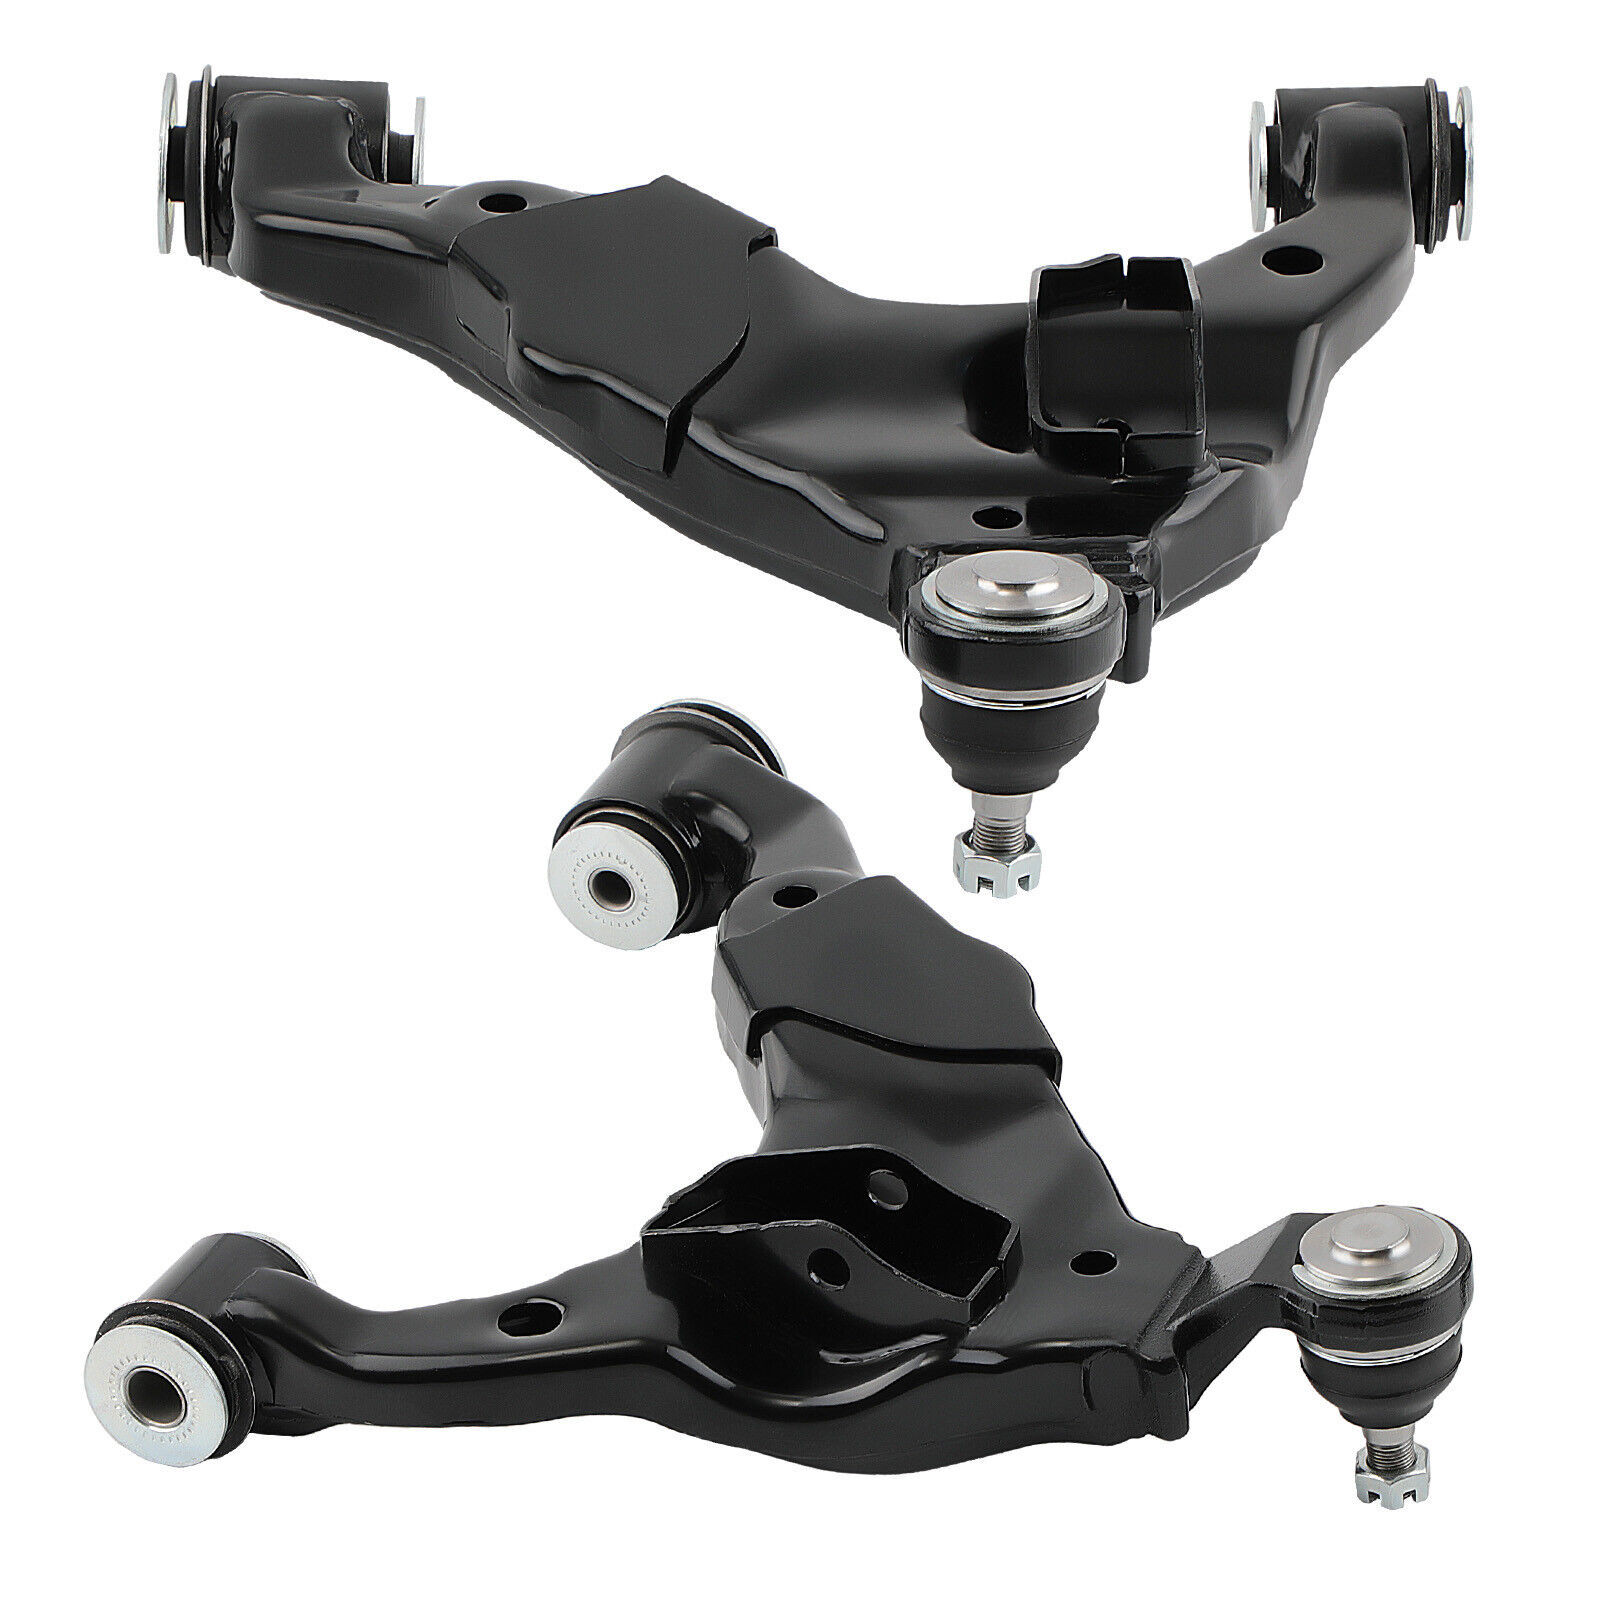 Primary image for Front Lower Control Arms w/ Ball Joints for Toyota Tacoma 2005 - 2013 2014 2015